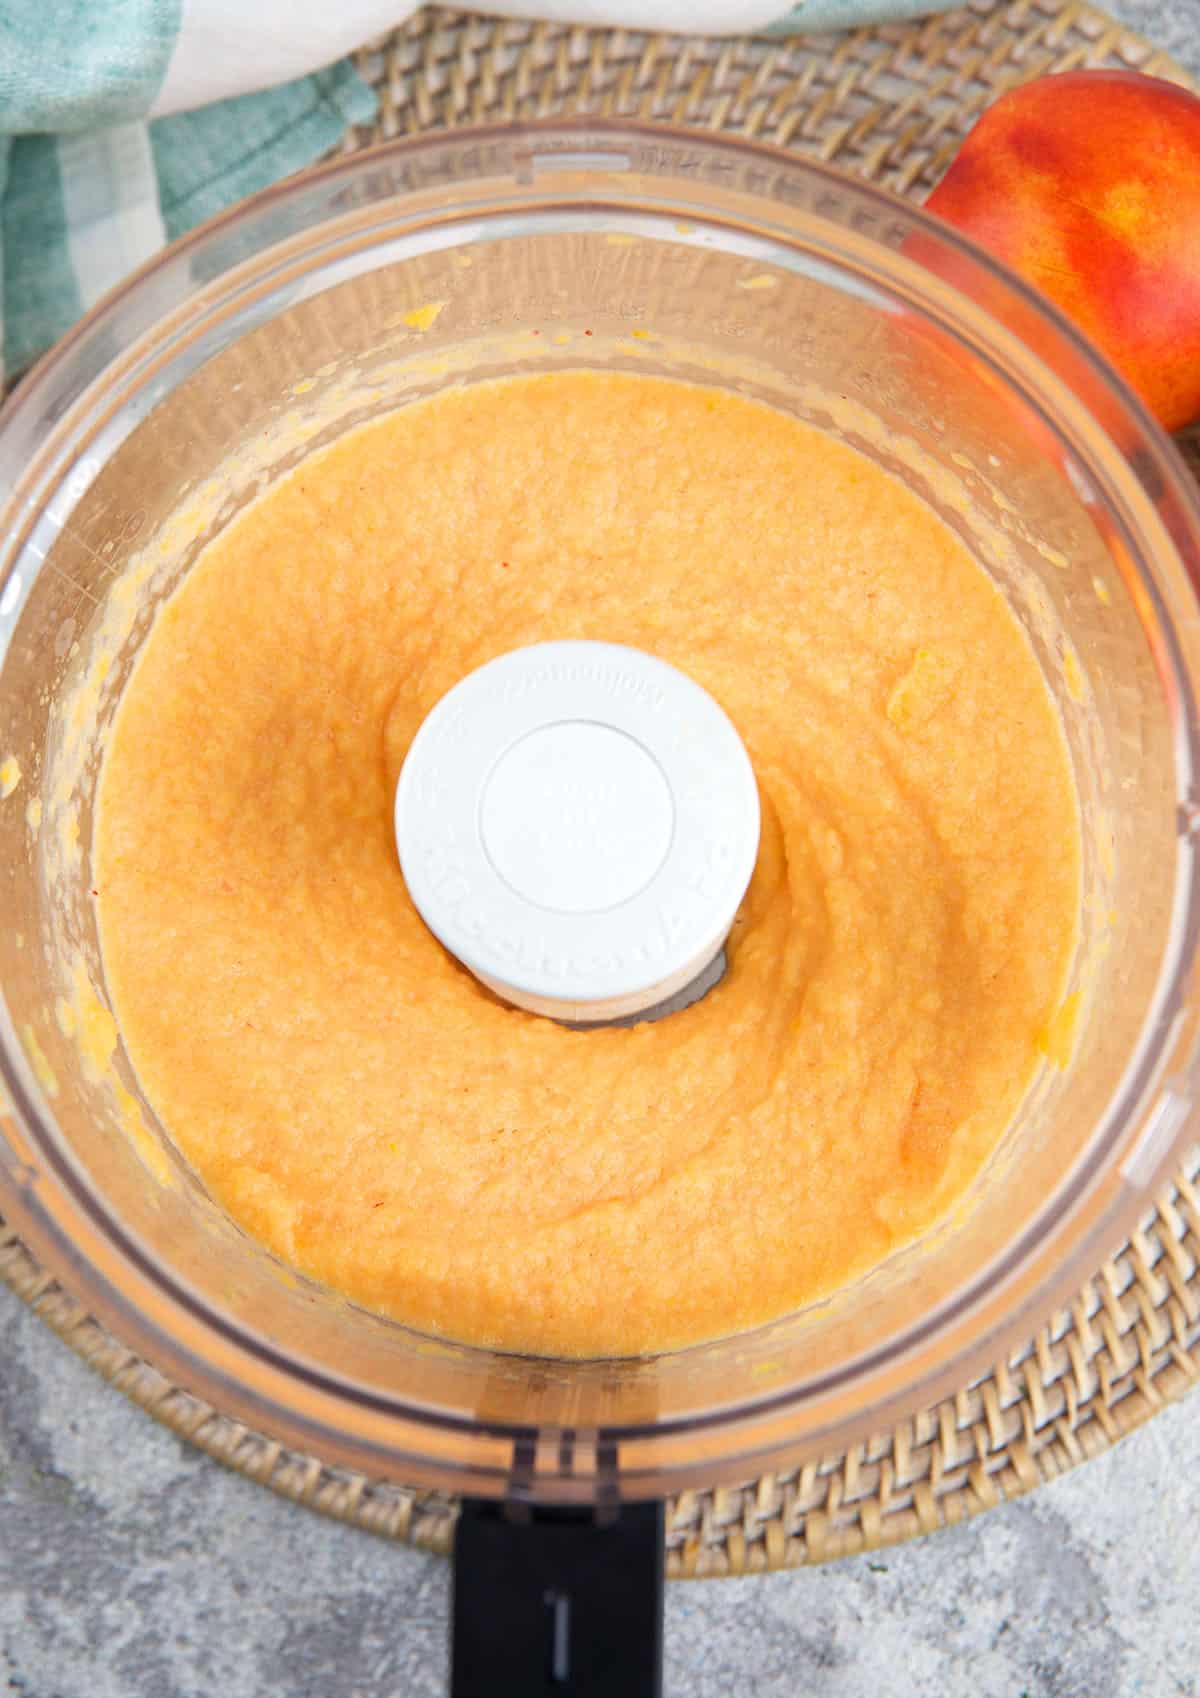 Peach puree is totally smooth in the bowl of a food processor.